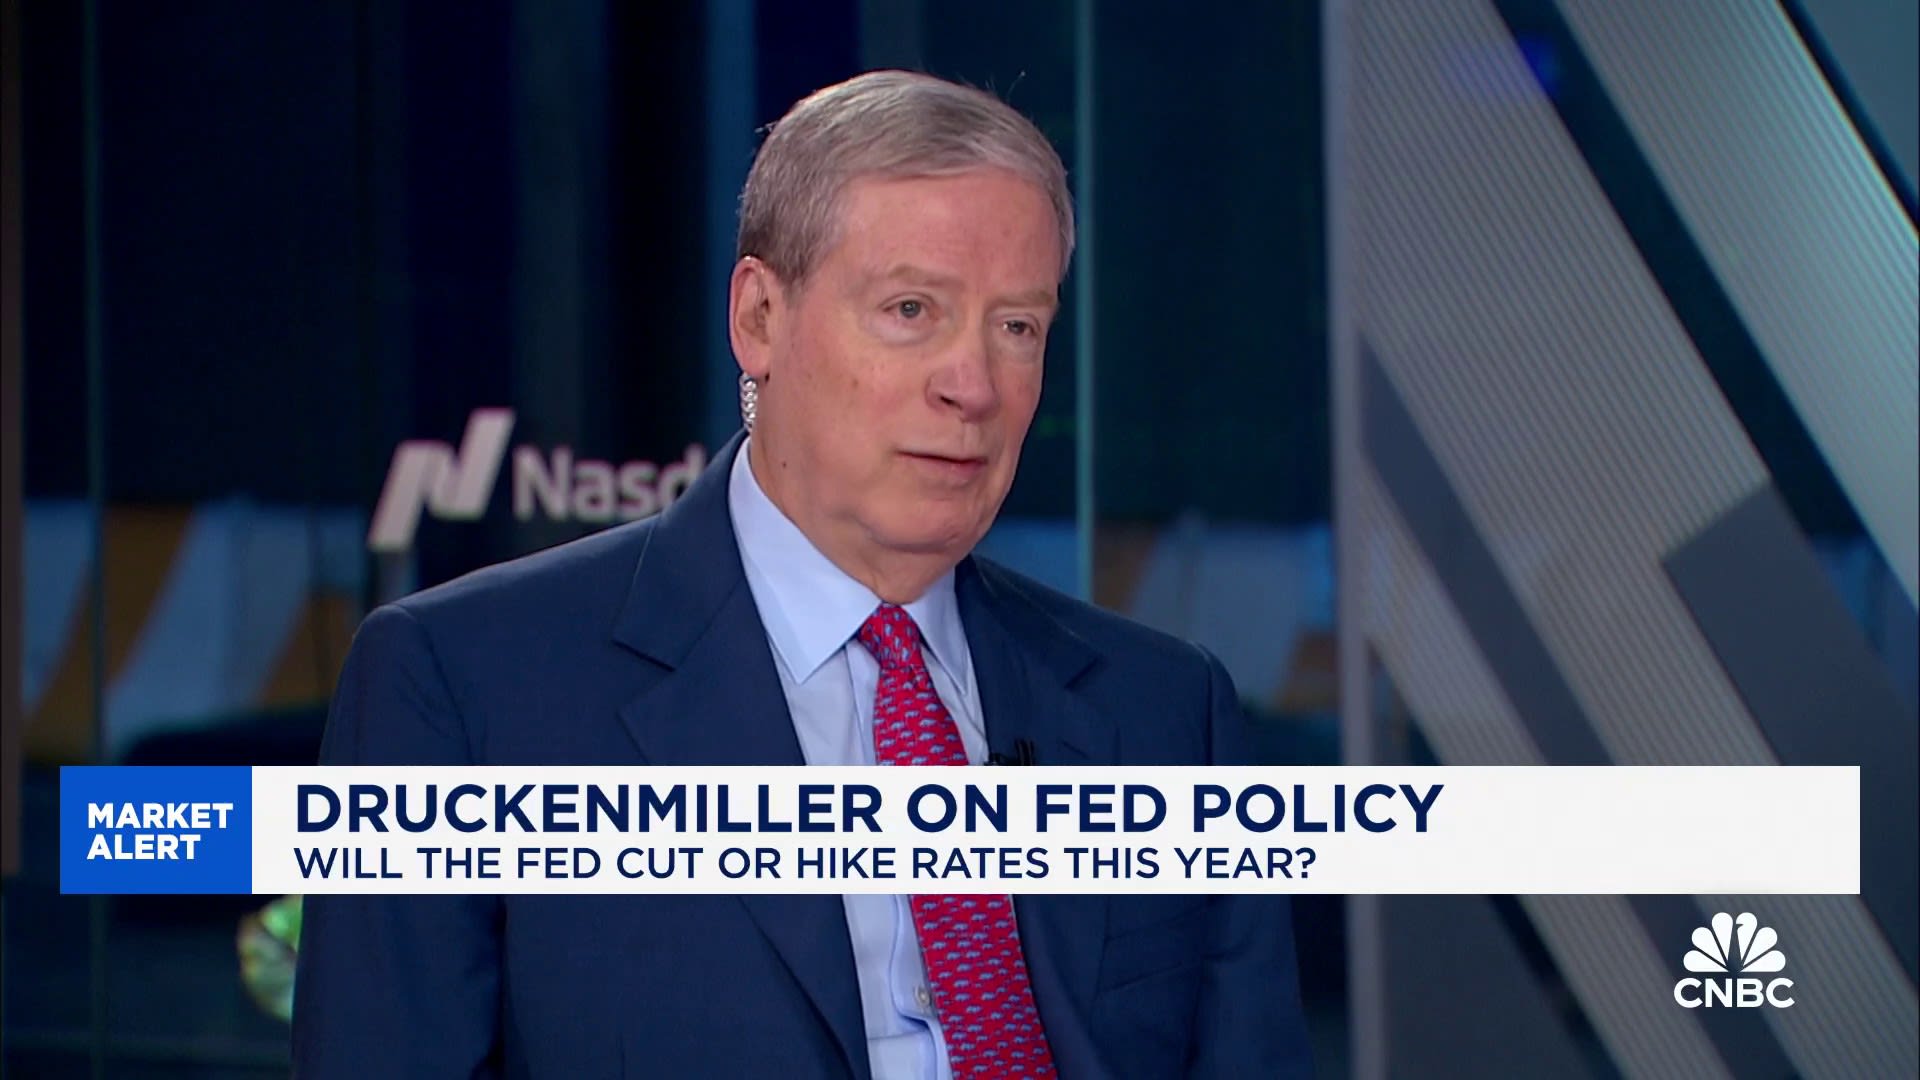 Stanley Druckenmiller gives Biden’s economic policies an ‘F,’ blames the Fed for reigniting inflation